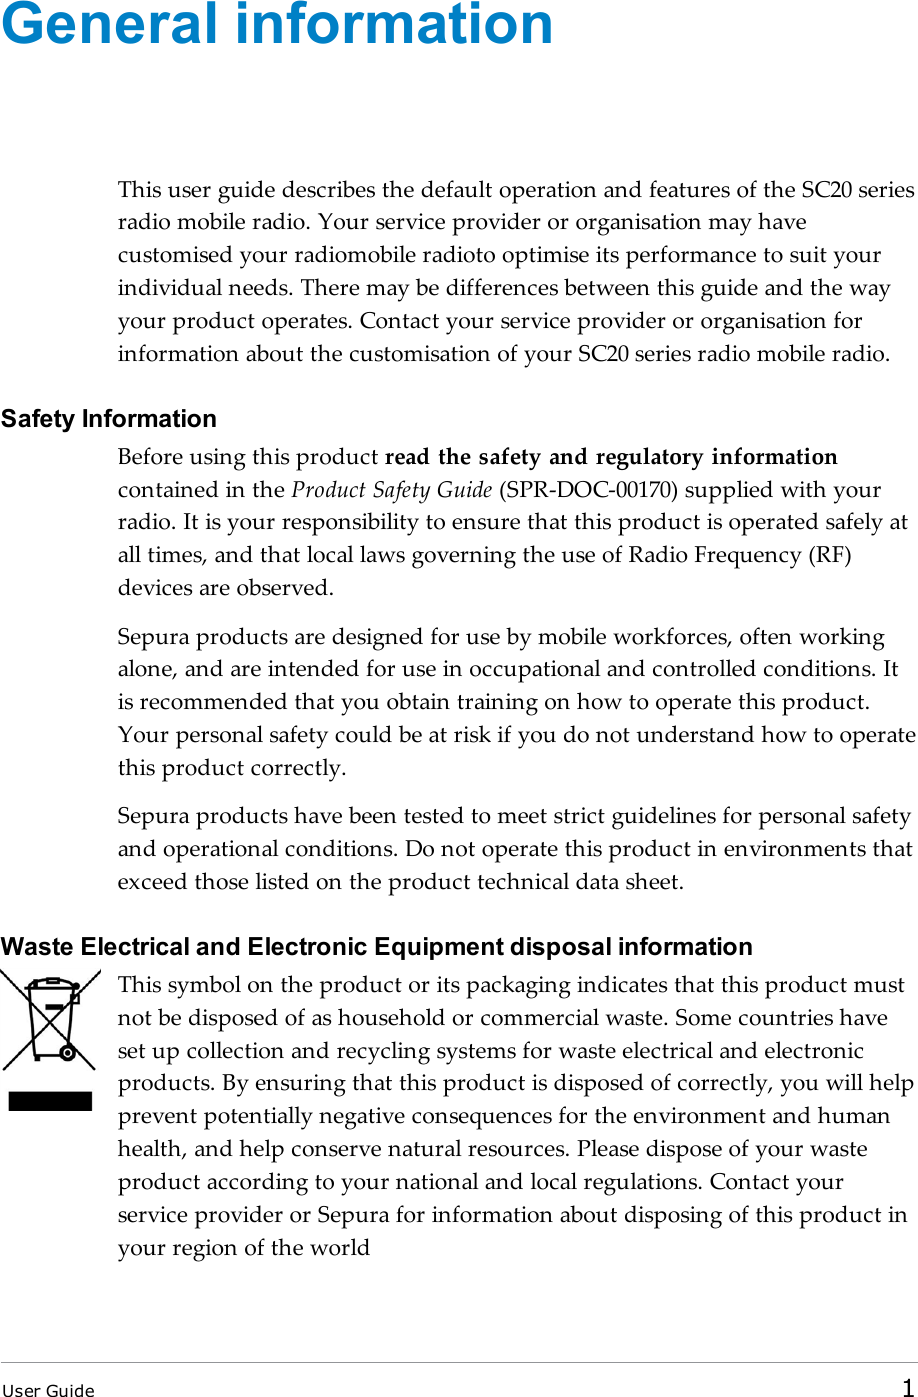 General informationThis user guide describes the default operation and features of the SC20 seriesradio mobile radio. Your service provider or organisation may havecustomised your radiomobile radioto optimise its performance to suit yourindividual needs. There may be differences between this guide and the wayyour product operates. Contact your service provider or organisation forinformation about the customisation of your SC20 series radio mobile radio.Safety InformationBefore using this product read the safety and regulatory informationcontained in the Product Safety Guide (SPR-DOC-00170) supplied with yourradio. It is your responsibility to ensure that this product is operated safely atall times, and that local laws governing the use of Radio Frequency (RF)devices are observed.Sepura products are designed for use by mobile workforces, often workingalone, and are intended for use in occupational and controlled conditions. Itis recommended that you obtain training on how to operate this product.Your personal safety could be at risk if you do not understand how to operatethis product correctly.Sepura products have been tested to meet strict guidelines for personal safetyand operational conditions. Do not operate this product in environments thatexceed those listed on the product technical data sheet.Waste Electrical and Electronic Equipment disposal informationThis symbol on the product or its packaging indicates that this product mustnot be disposed of as household or commercial waste. Some countries haveset up collection and recycling systems for waste electrical and electronicproducts. By ensuring that this product is disposed of correctly, you will helpprevent potentially negative consequences for the environment and humanhealth, and help conserve natural resources. Please dispose of your wasteproduct according to your national and local regulations. Contact yourservice provider or Sepura for information about disposing of this product inyour region of the worldUser Guide 1